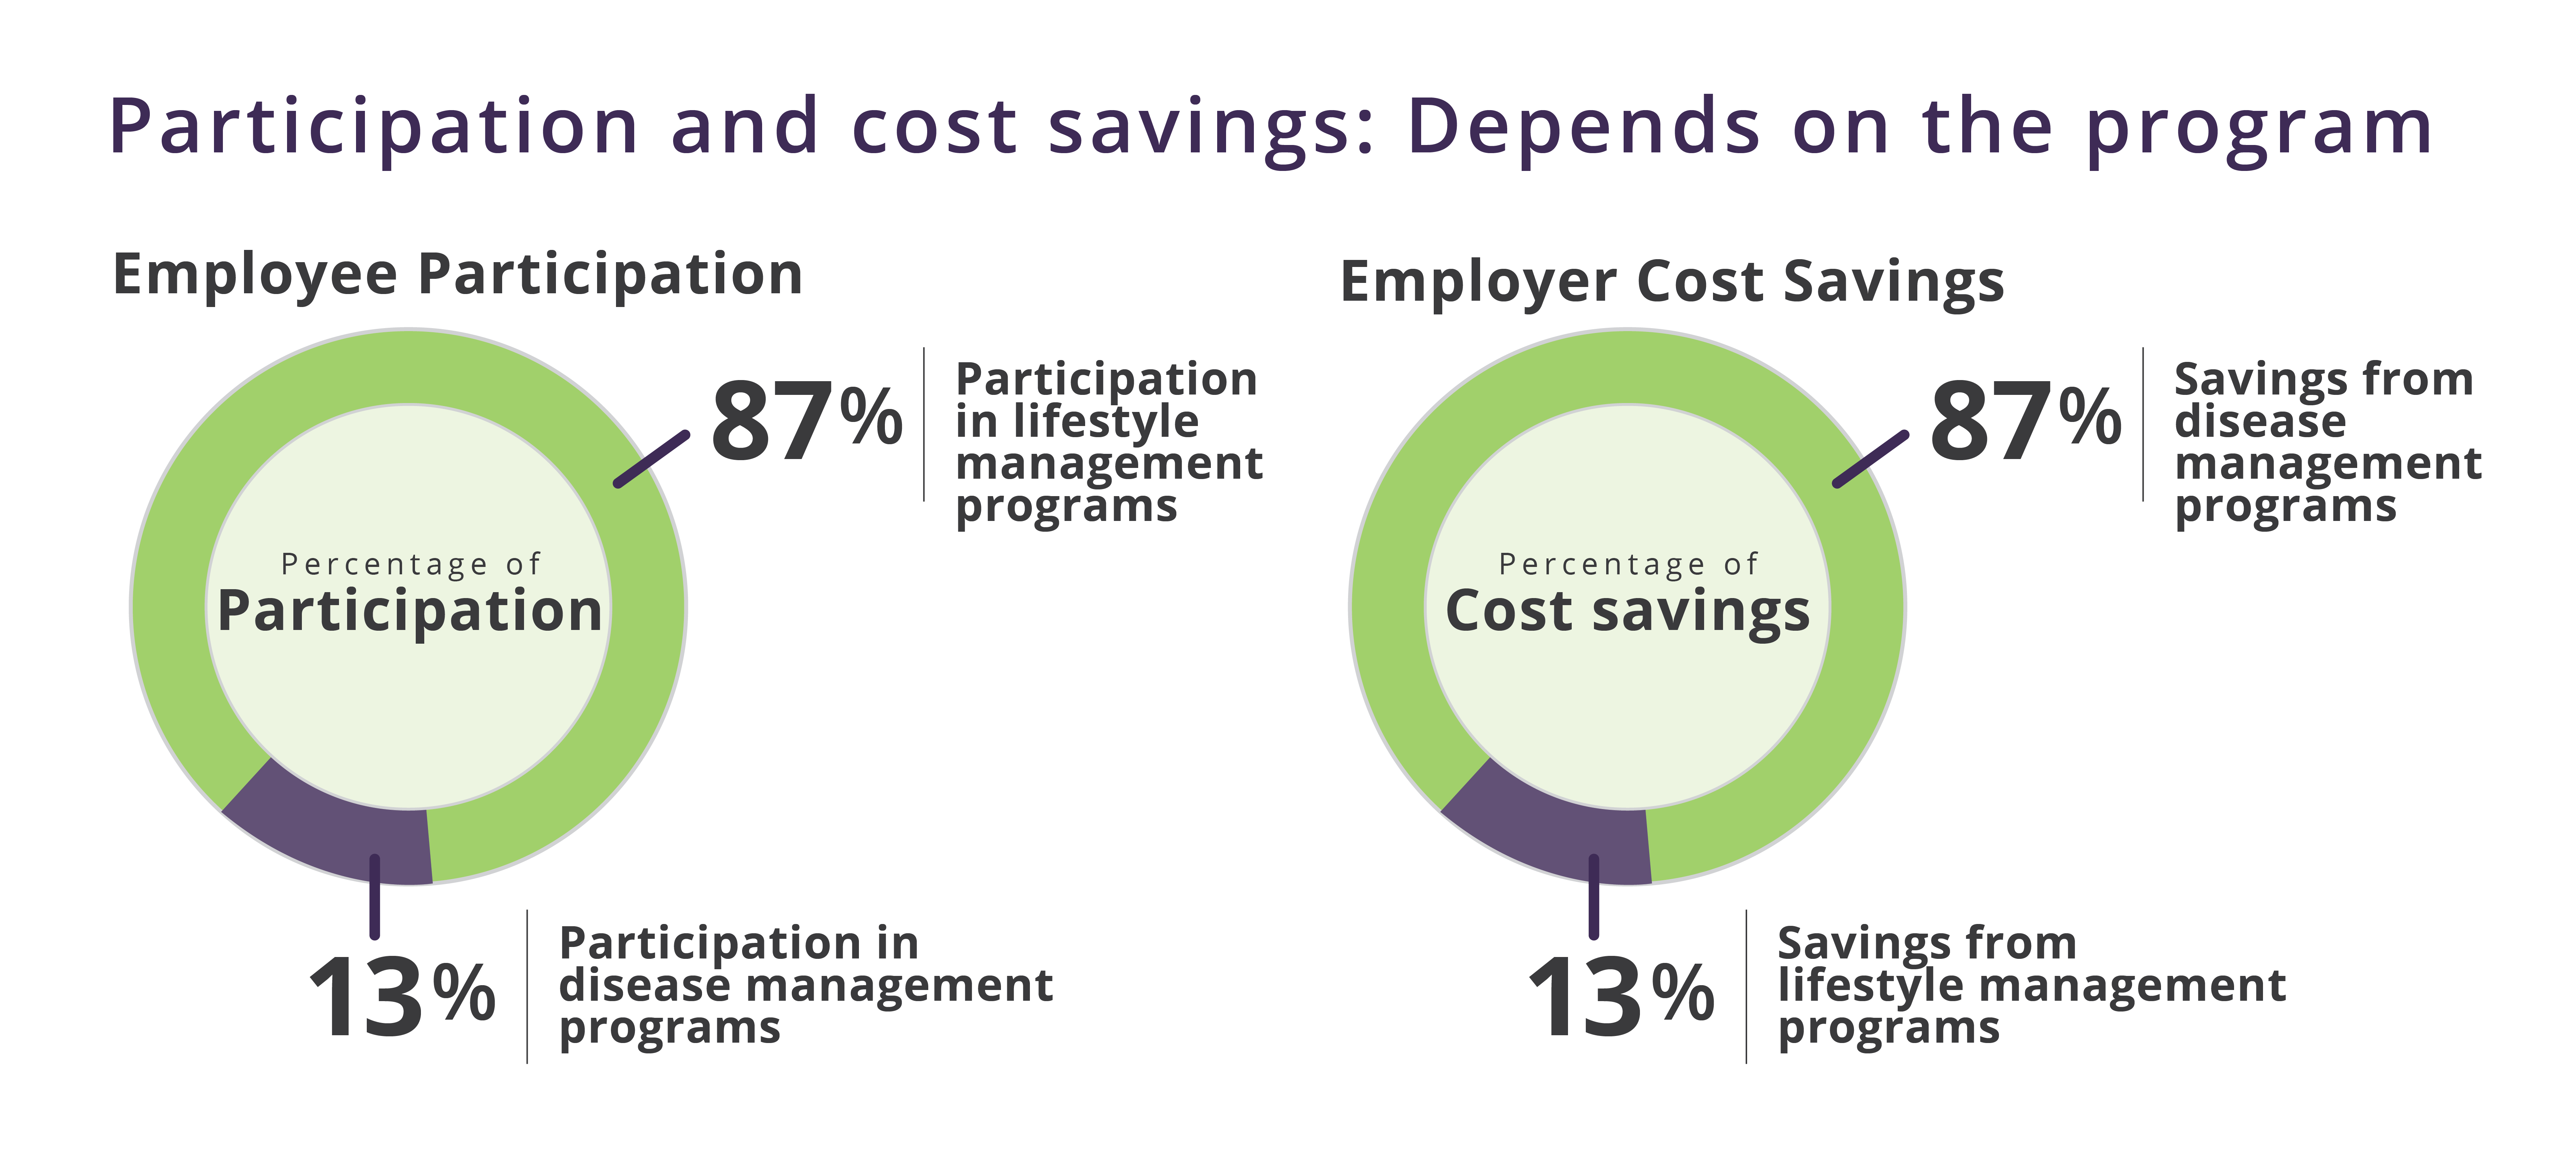 Participation and cost savings